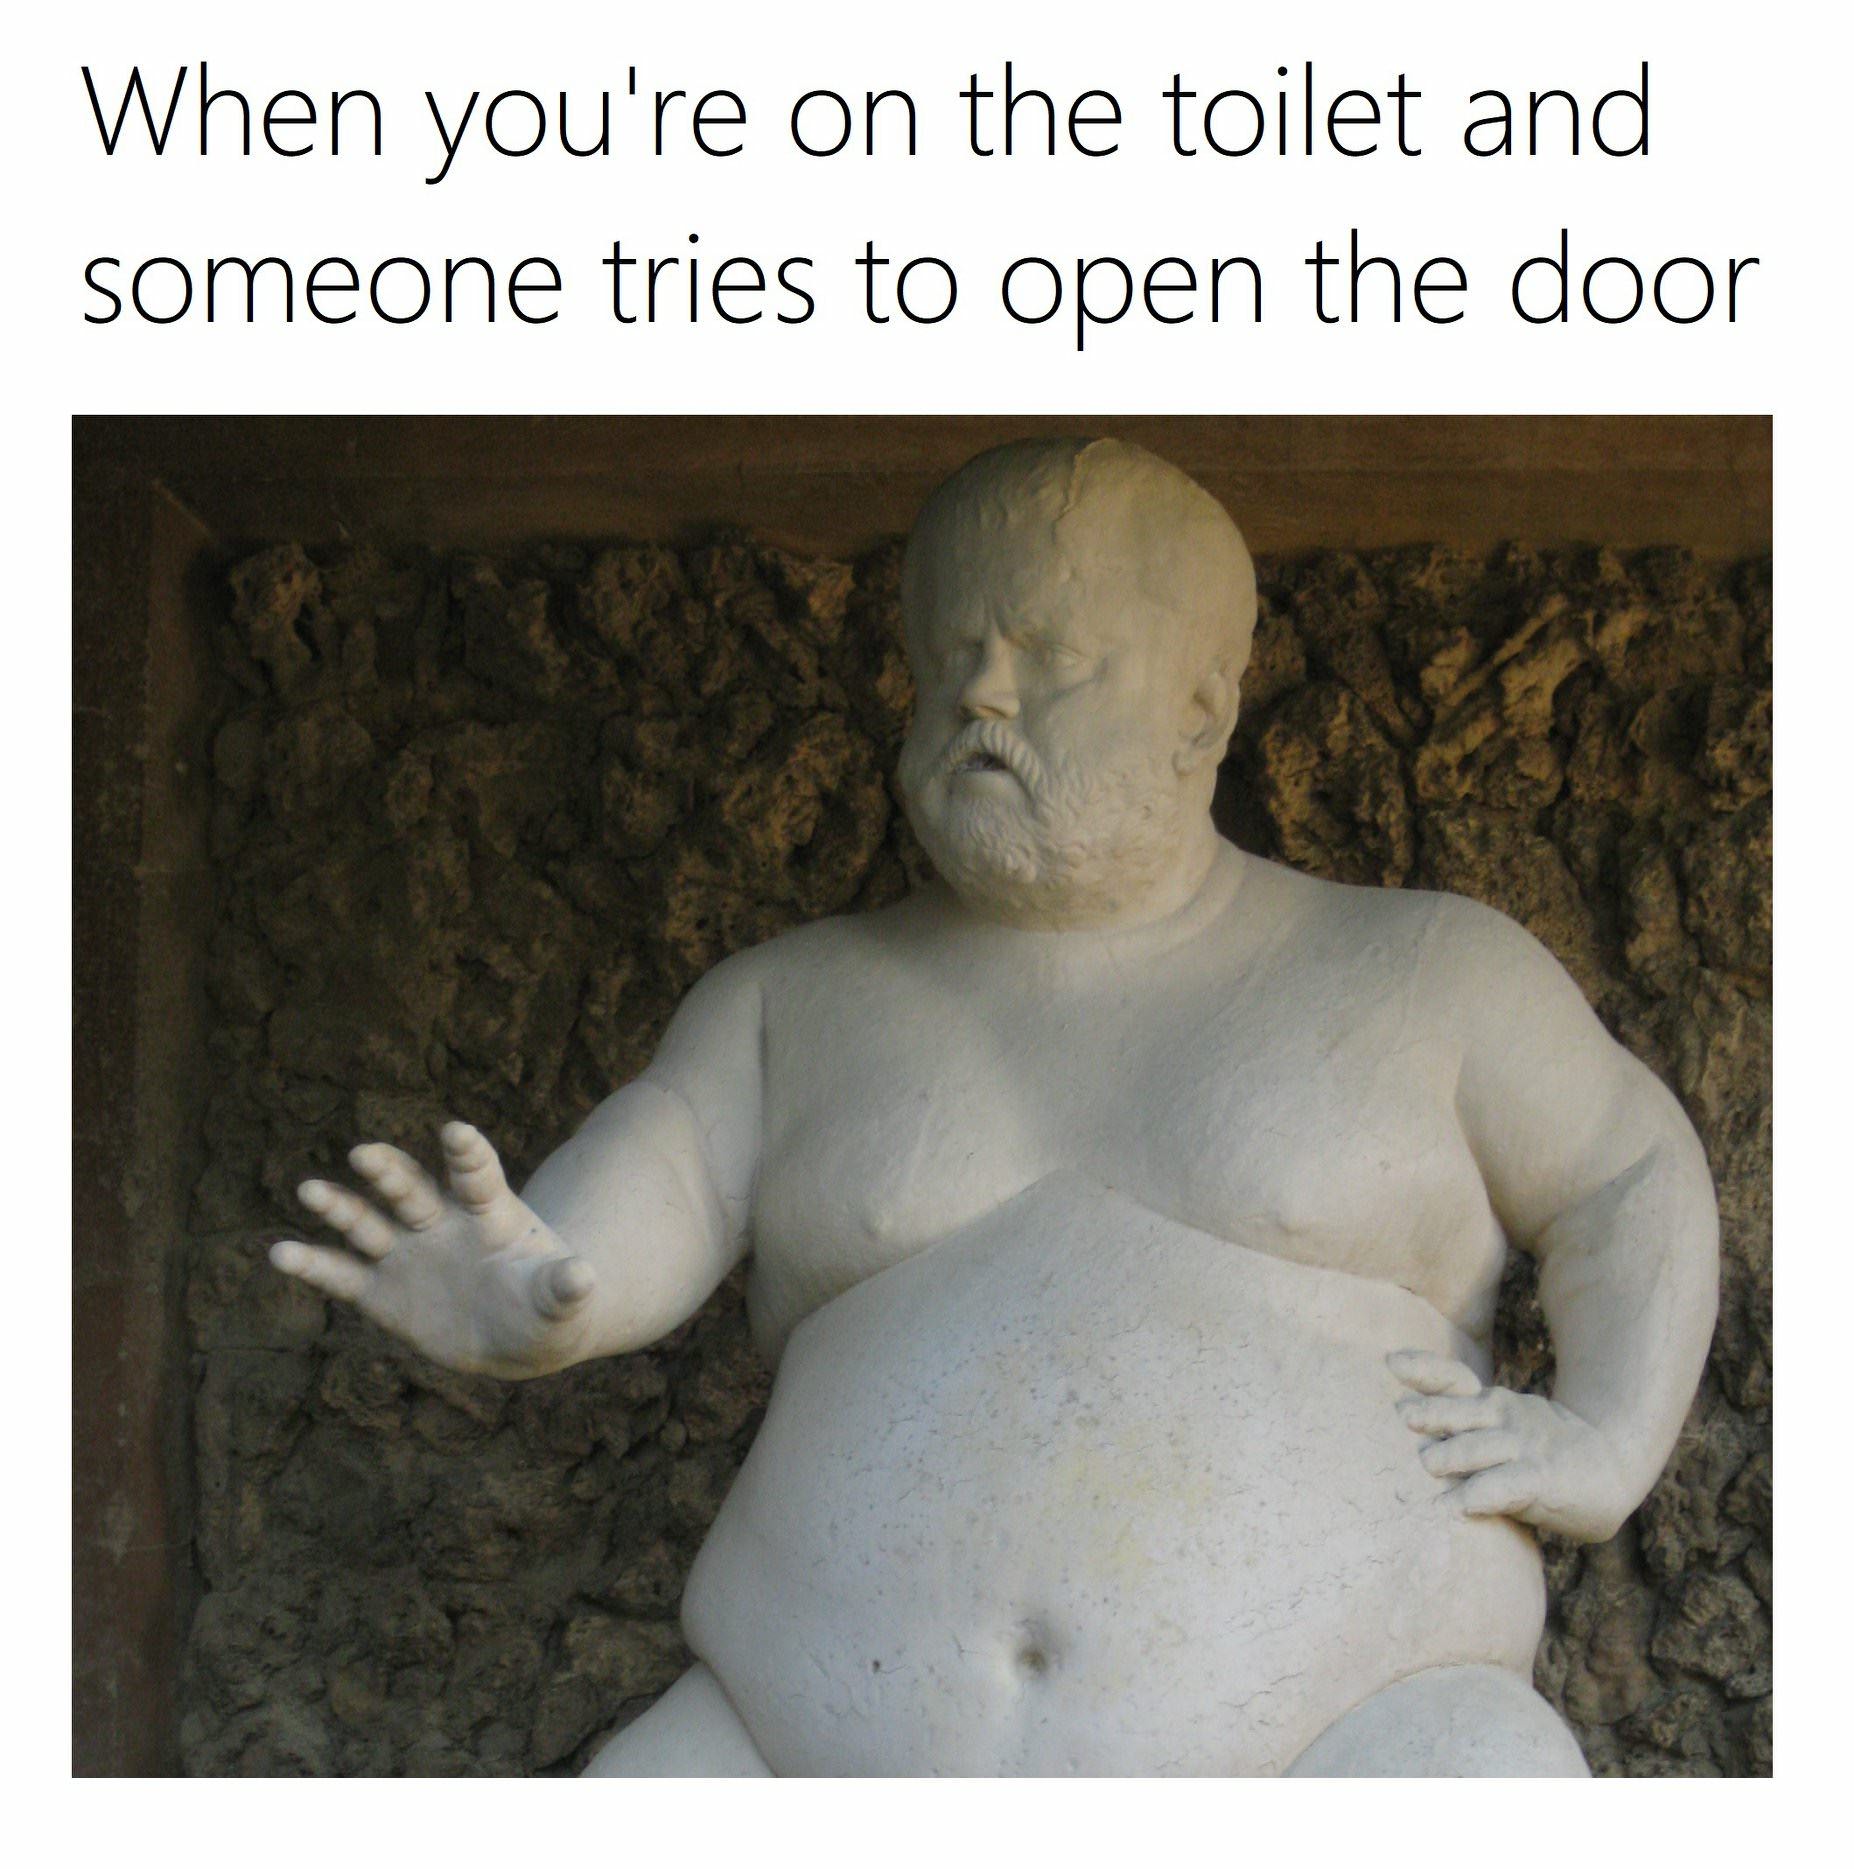 boboli gardens - When you're on the toilet and someone tries to open the door